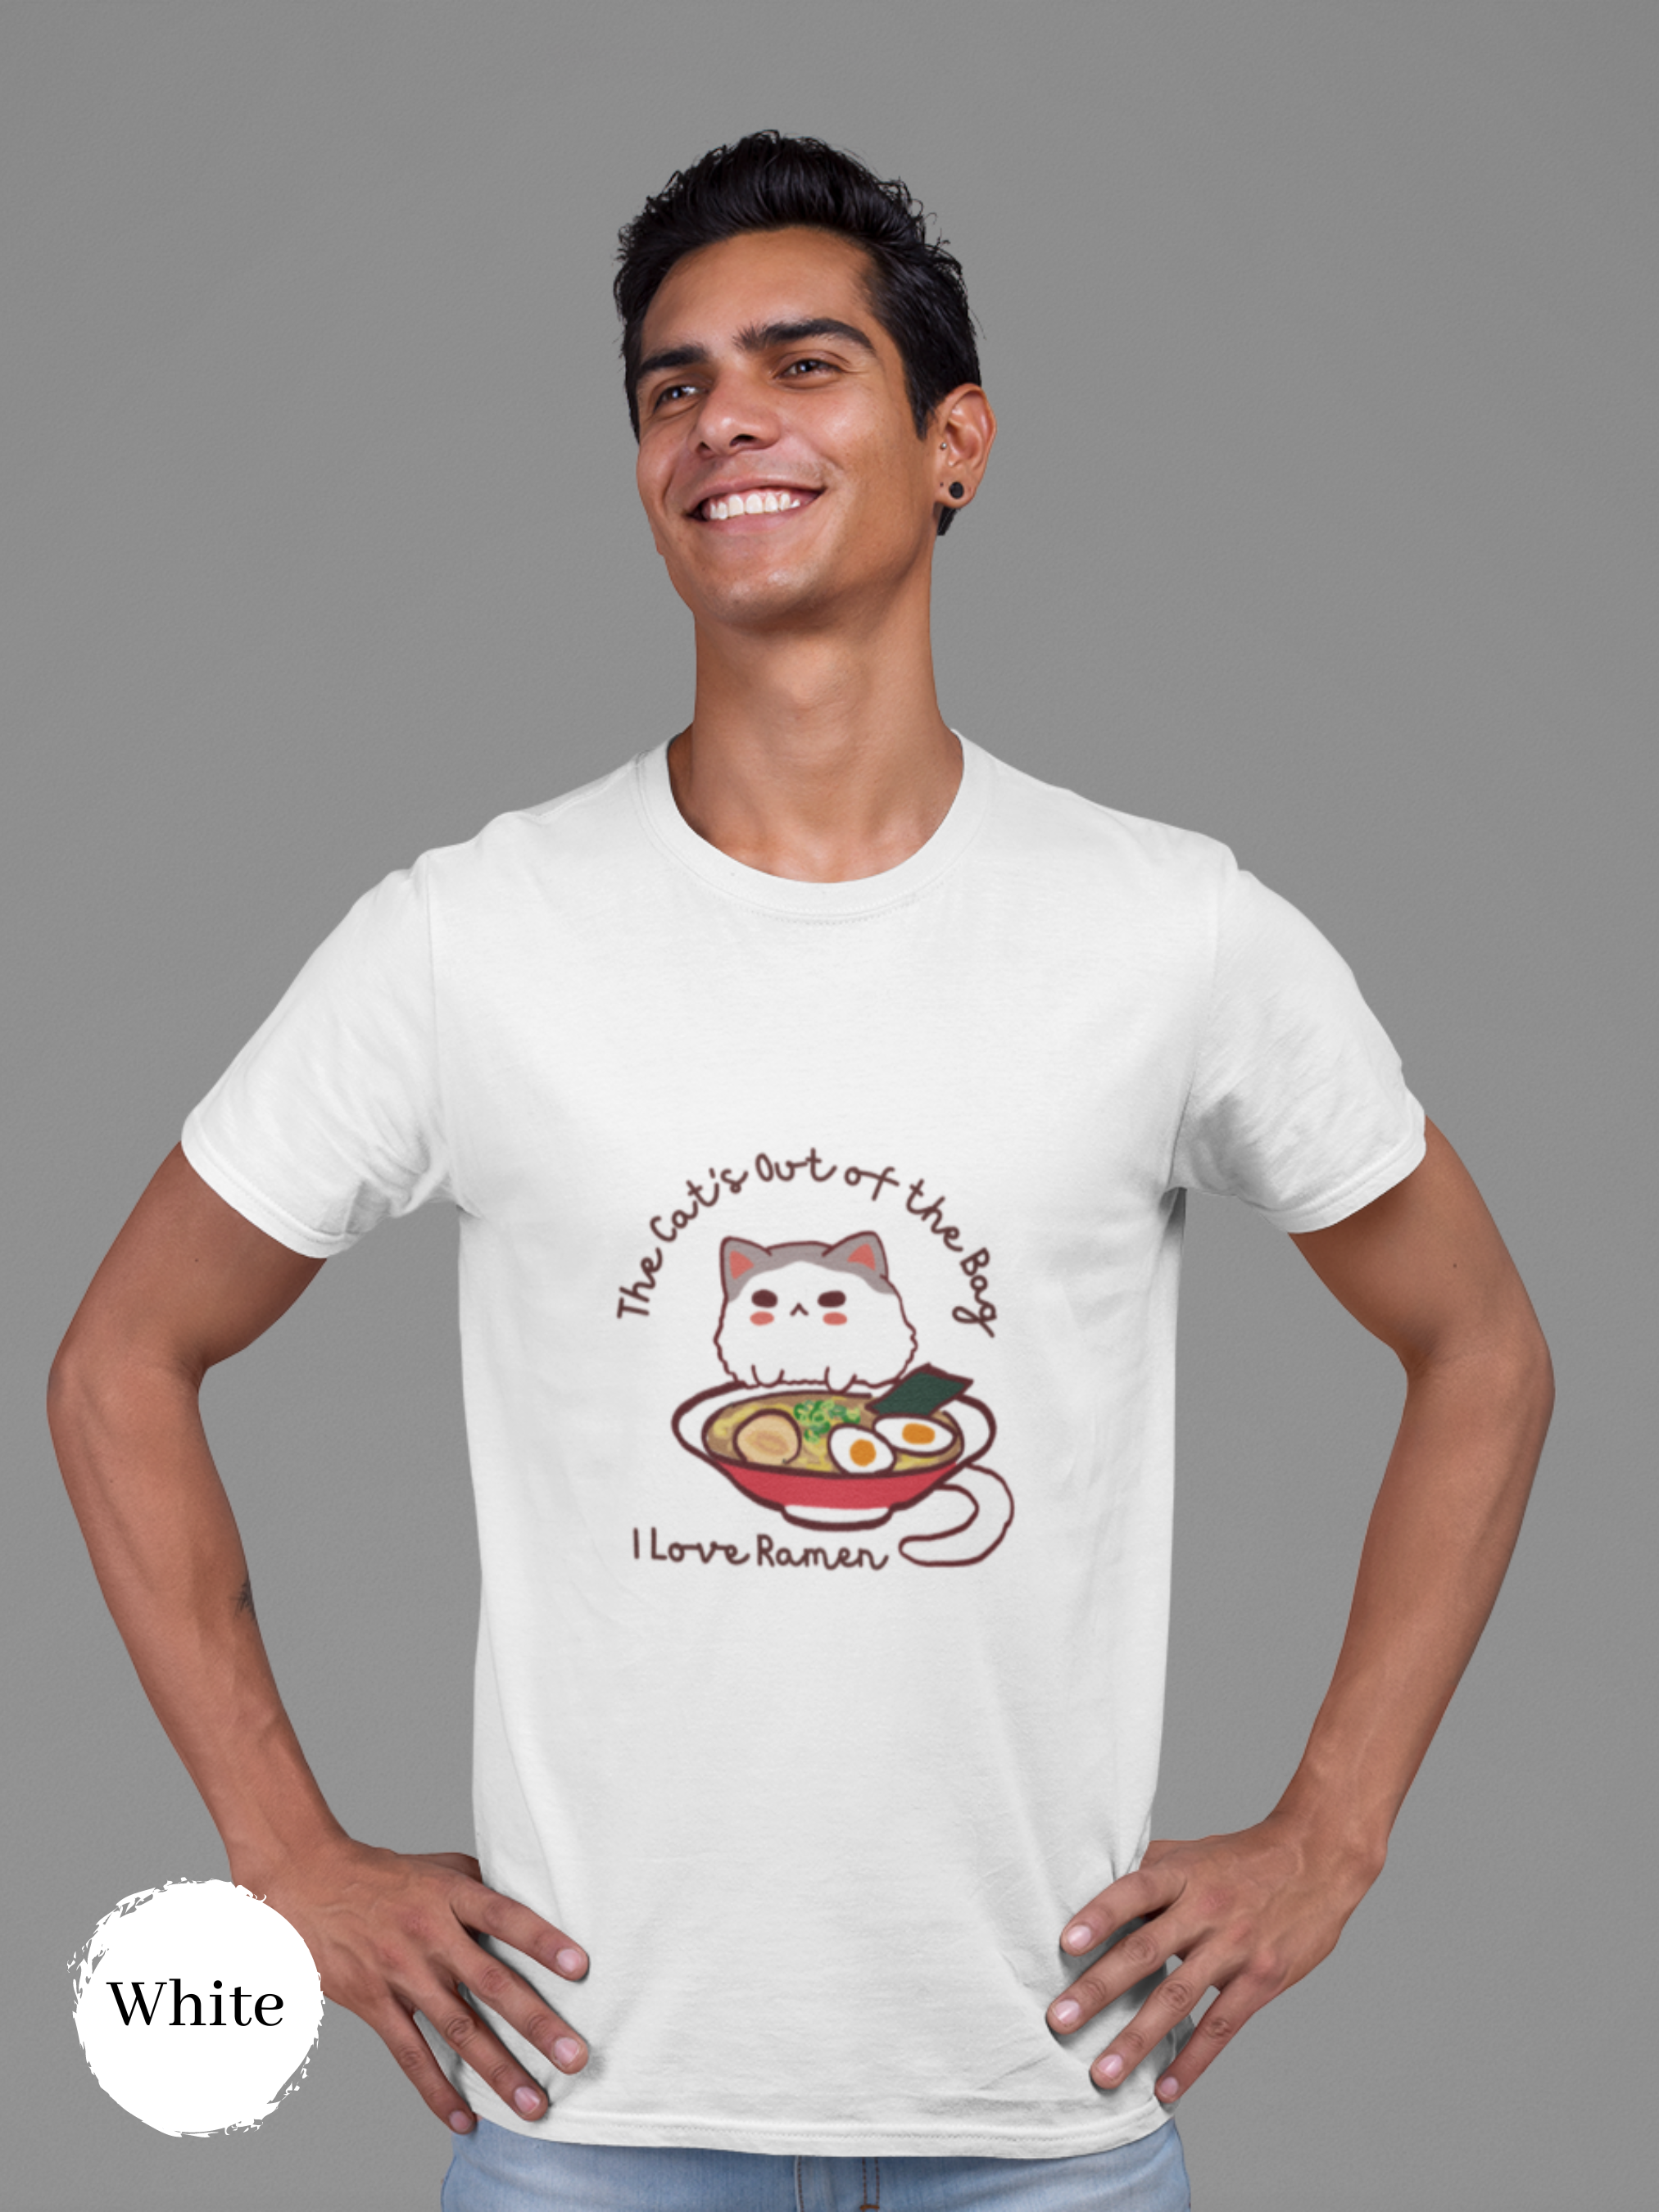 Ramen T-Shirt: The Cat's Out of the Bag, I Love Ramen - Japanese Foodie Shirt with Adorable Cat and Ramen Art